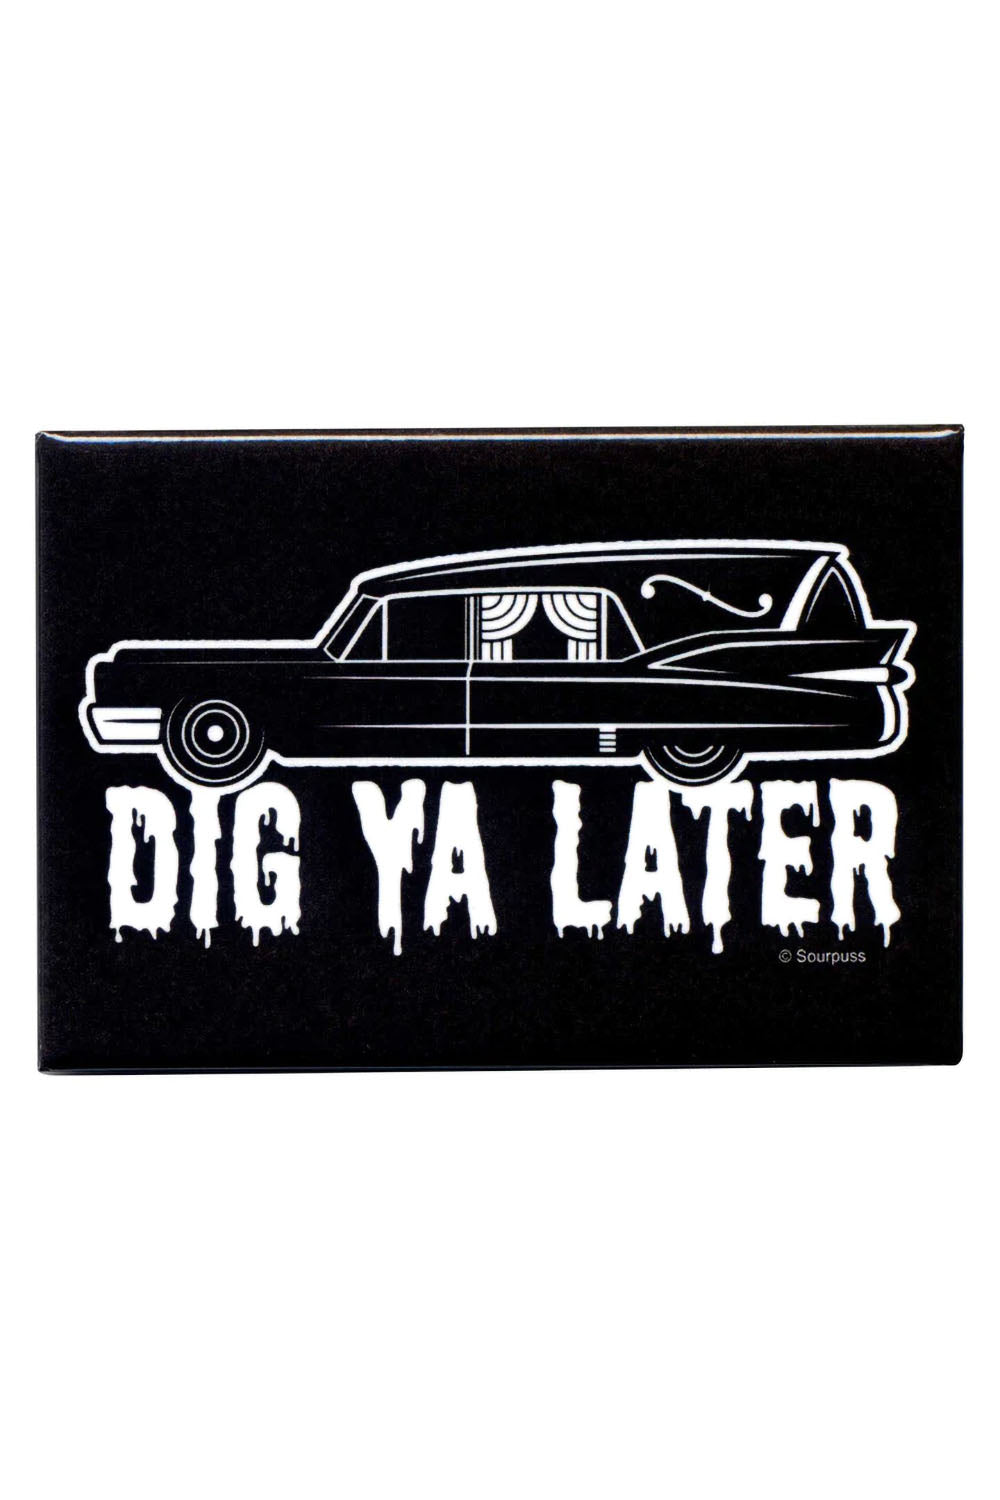 Dig Ya Later Hearse Magnet